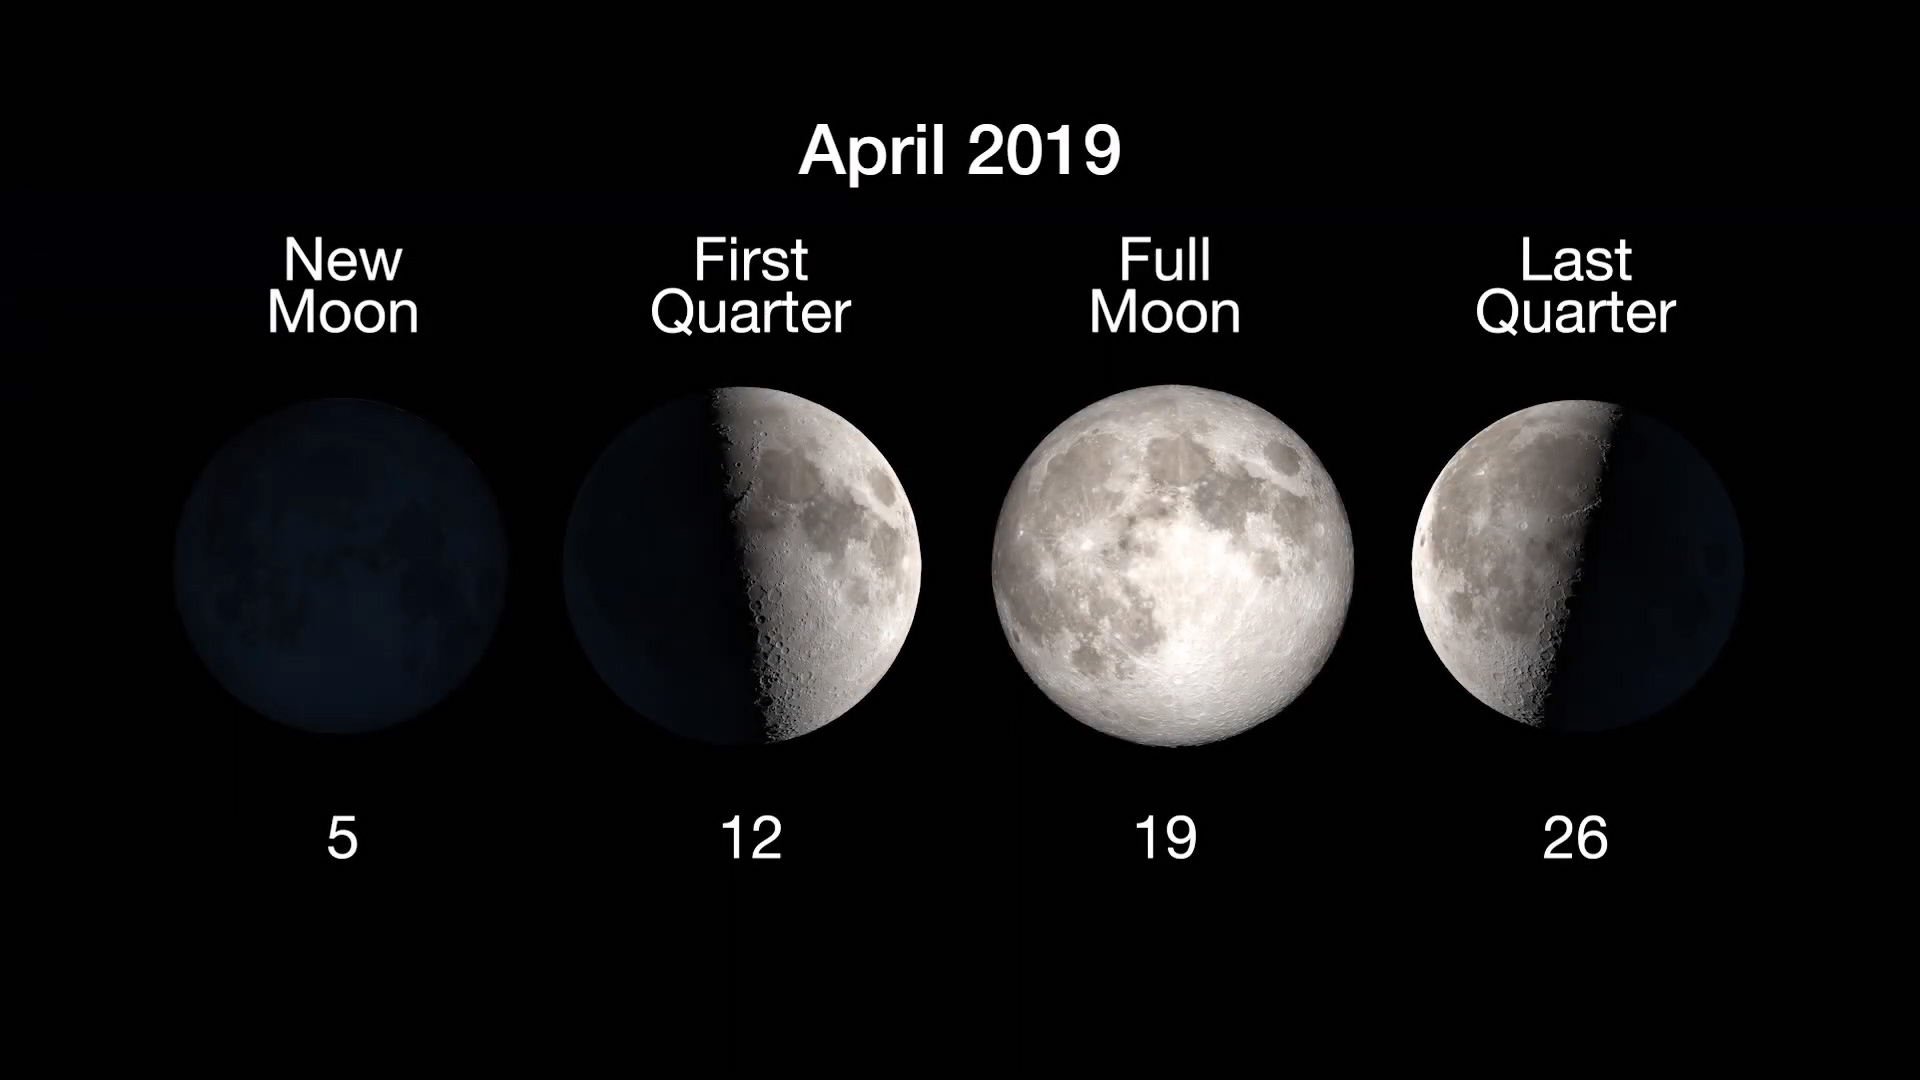 Moon Phases: New Moon, April 5, first quarter April 12, Full Moon April 19, last quarter, April 26.